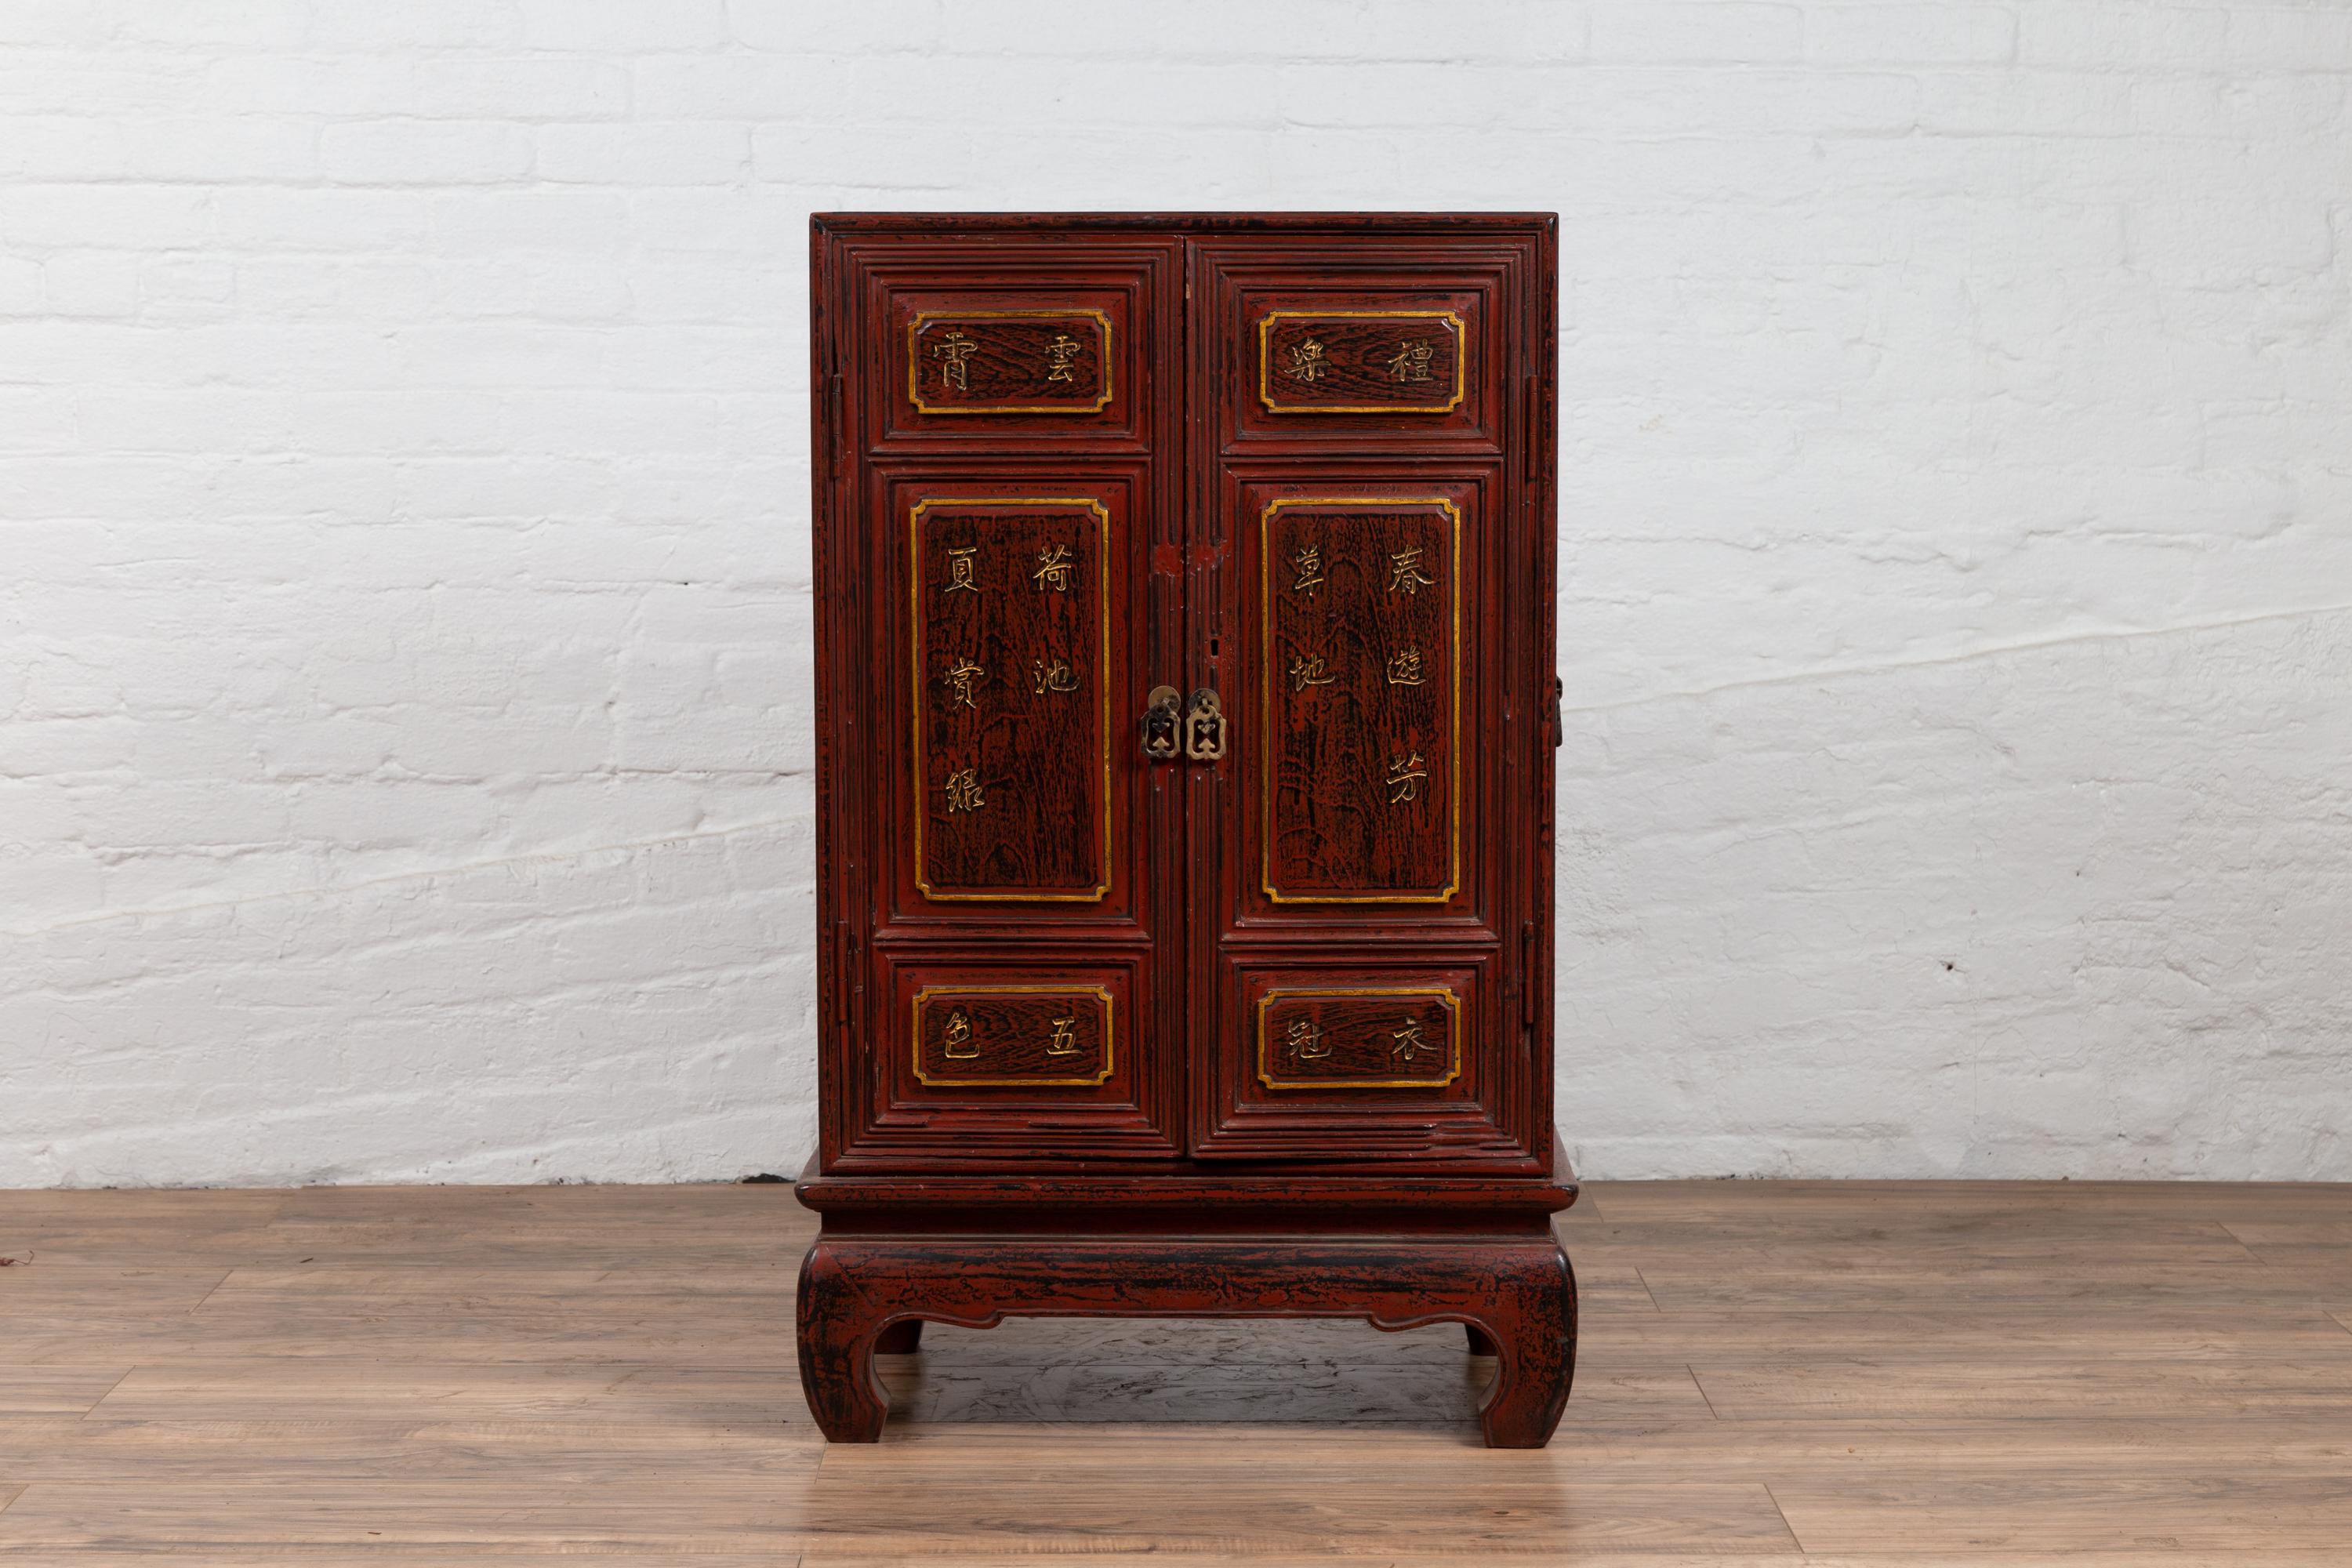 A Japanese vintage small display cabinet from the mid-20th century, with negora lacquer and gilded calligraphy. Born in Japan during the mid-century period, this lovely display cabinet features two doors, adorned with raised panels showcasing gilded